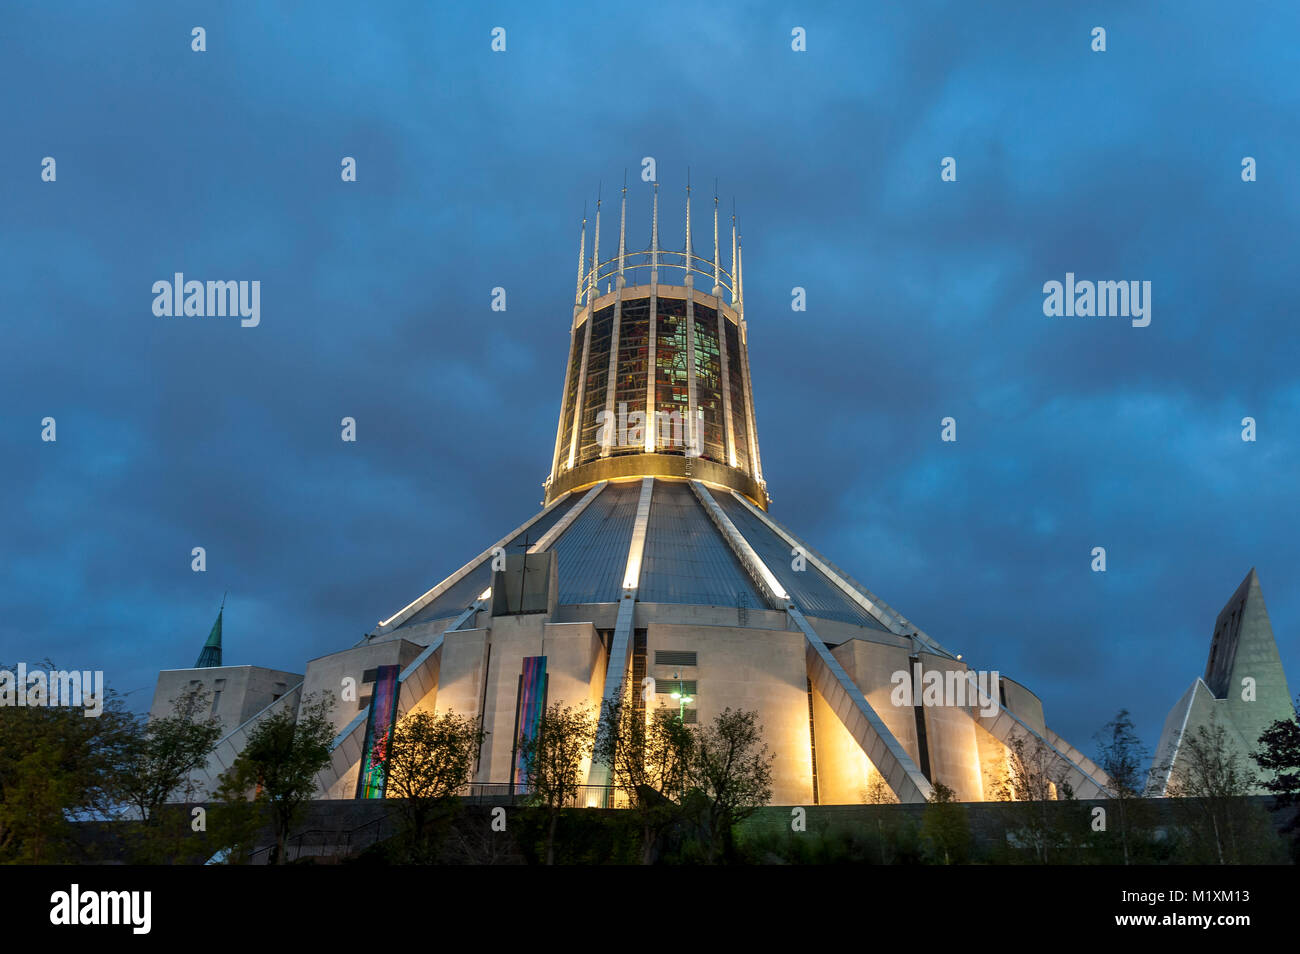 Liverpool Metropolitan Cathedral, officially known as the Metropolitan Cathedral of Christ the King, is the seat of the Archbishop of Liverpool and th Stock Photo